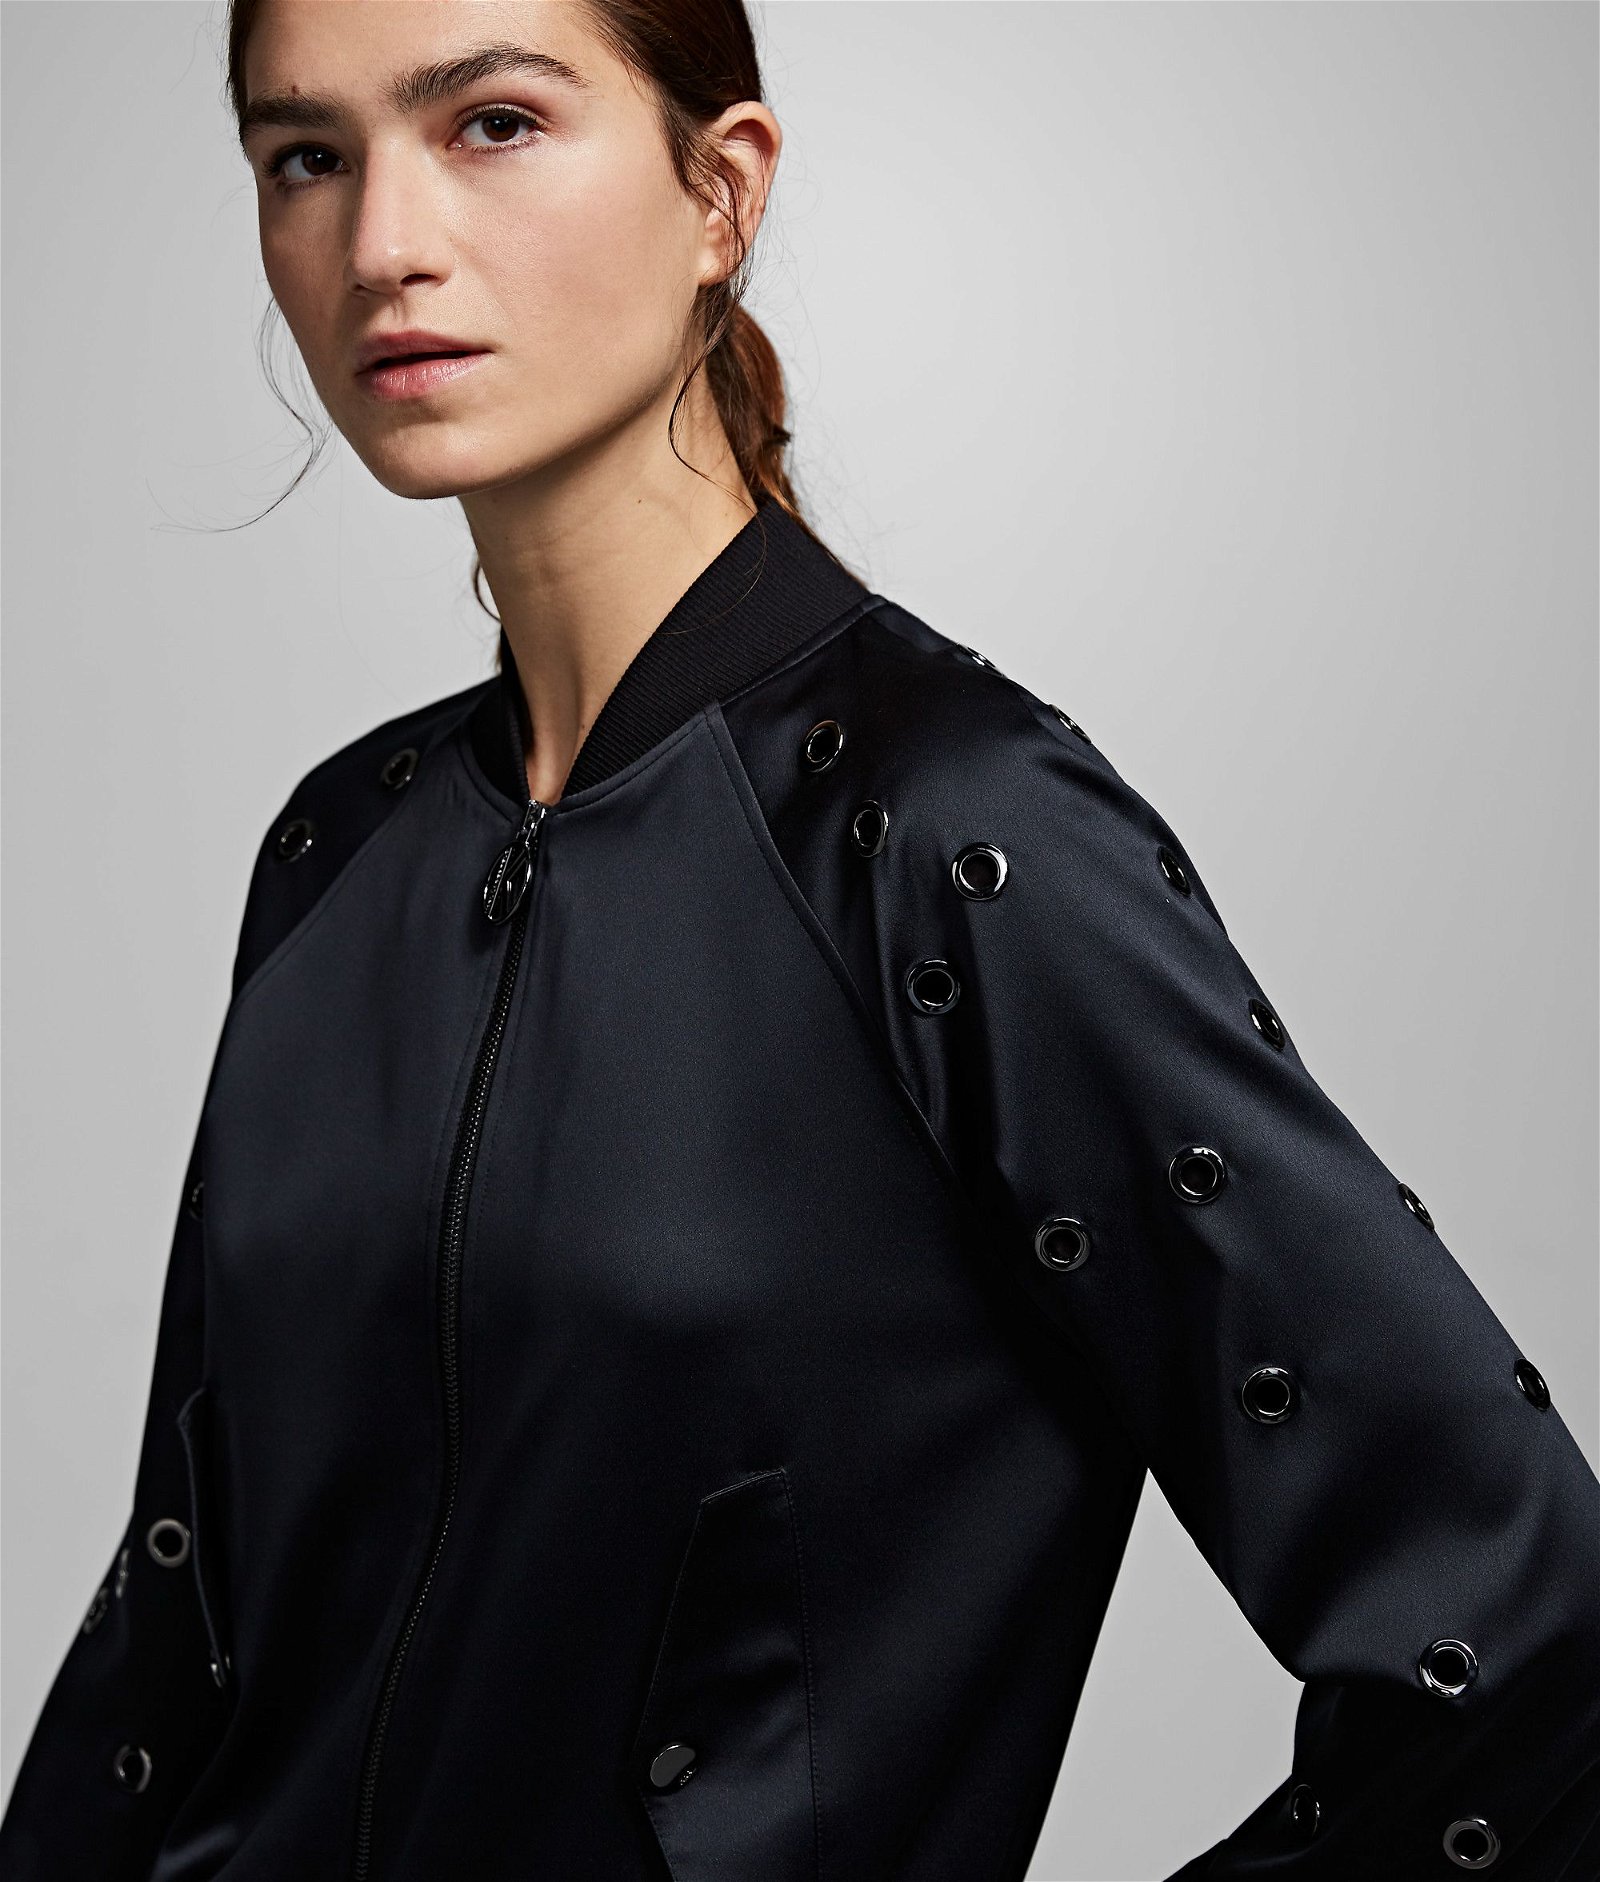 KARL LAGERFELD Bomber Jacket with Eyelets in Midnight Blue | Endource